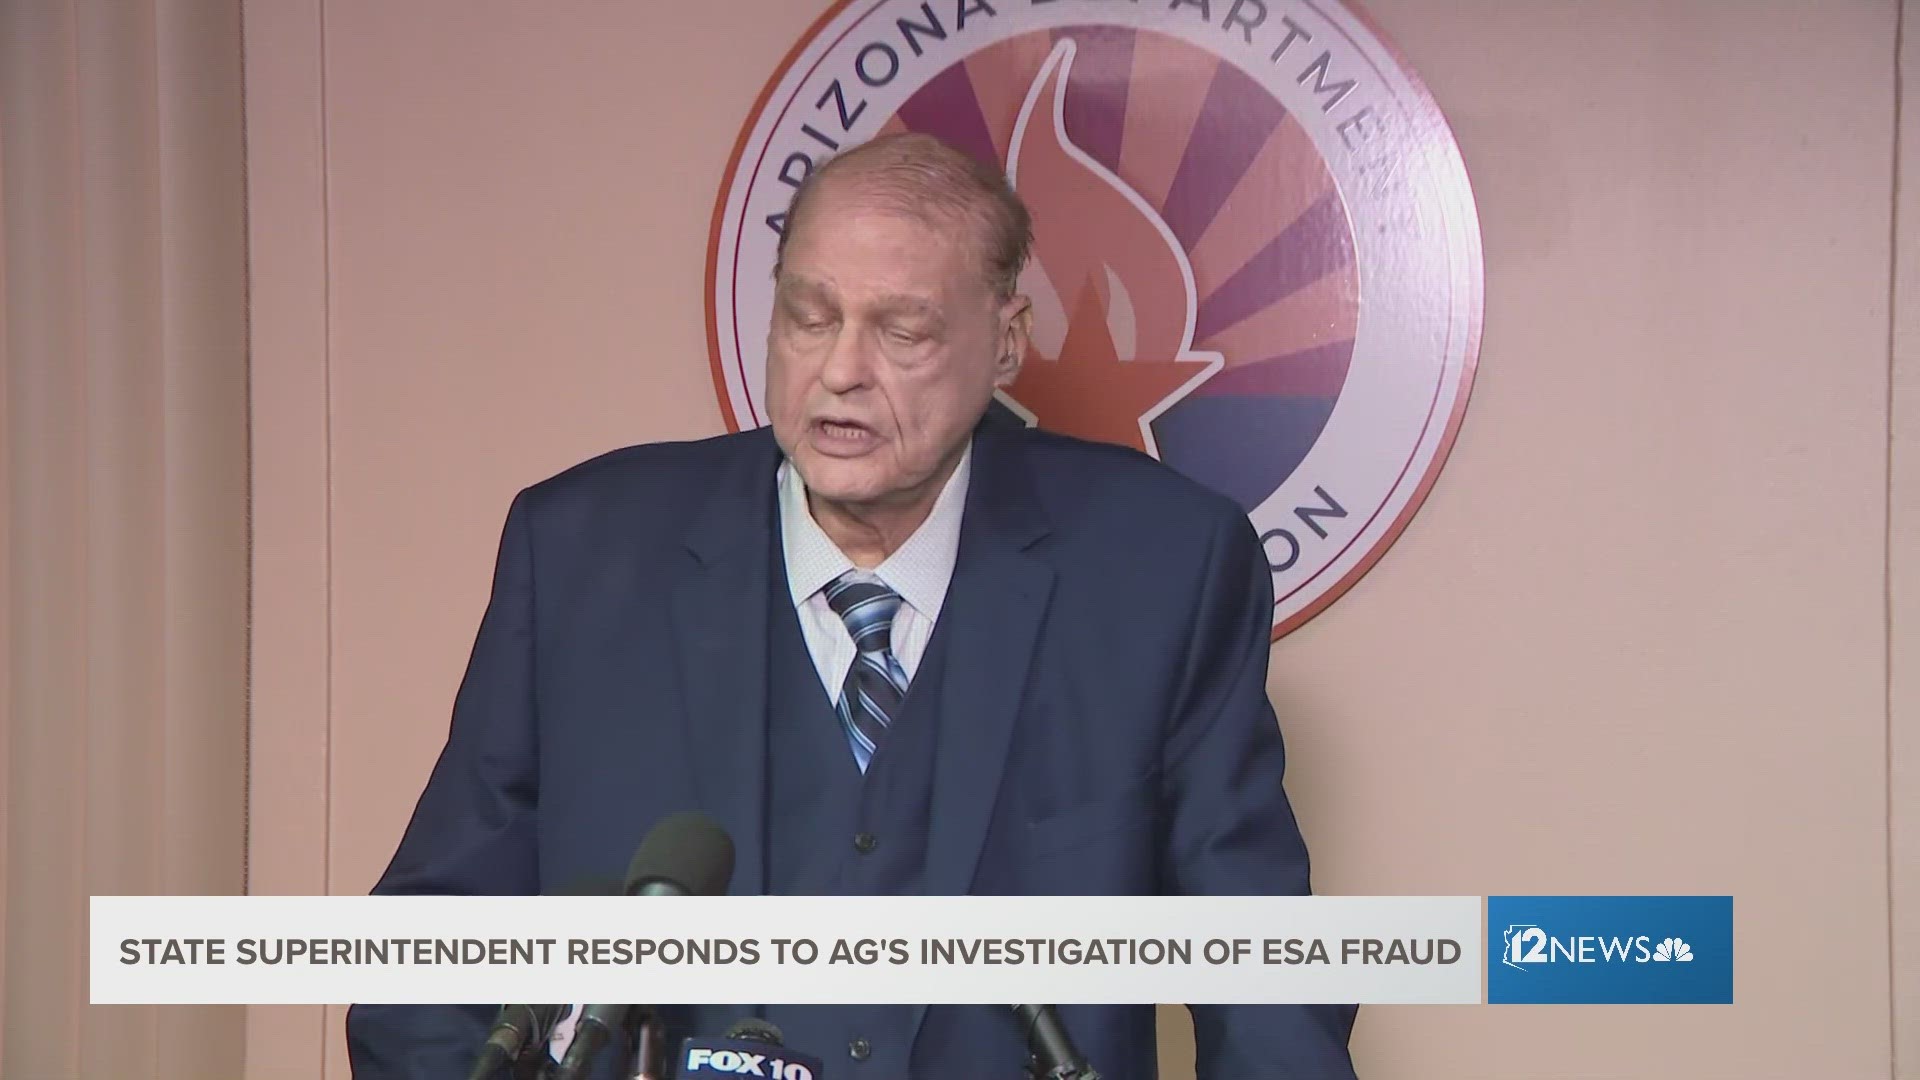 Arizona Superintendent of Public Instruction Tom Horne will be responding to the AG's ongoing investigation into the ESA program Feb. 29.